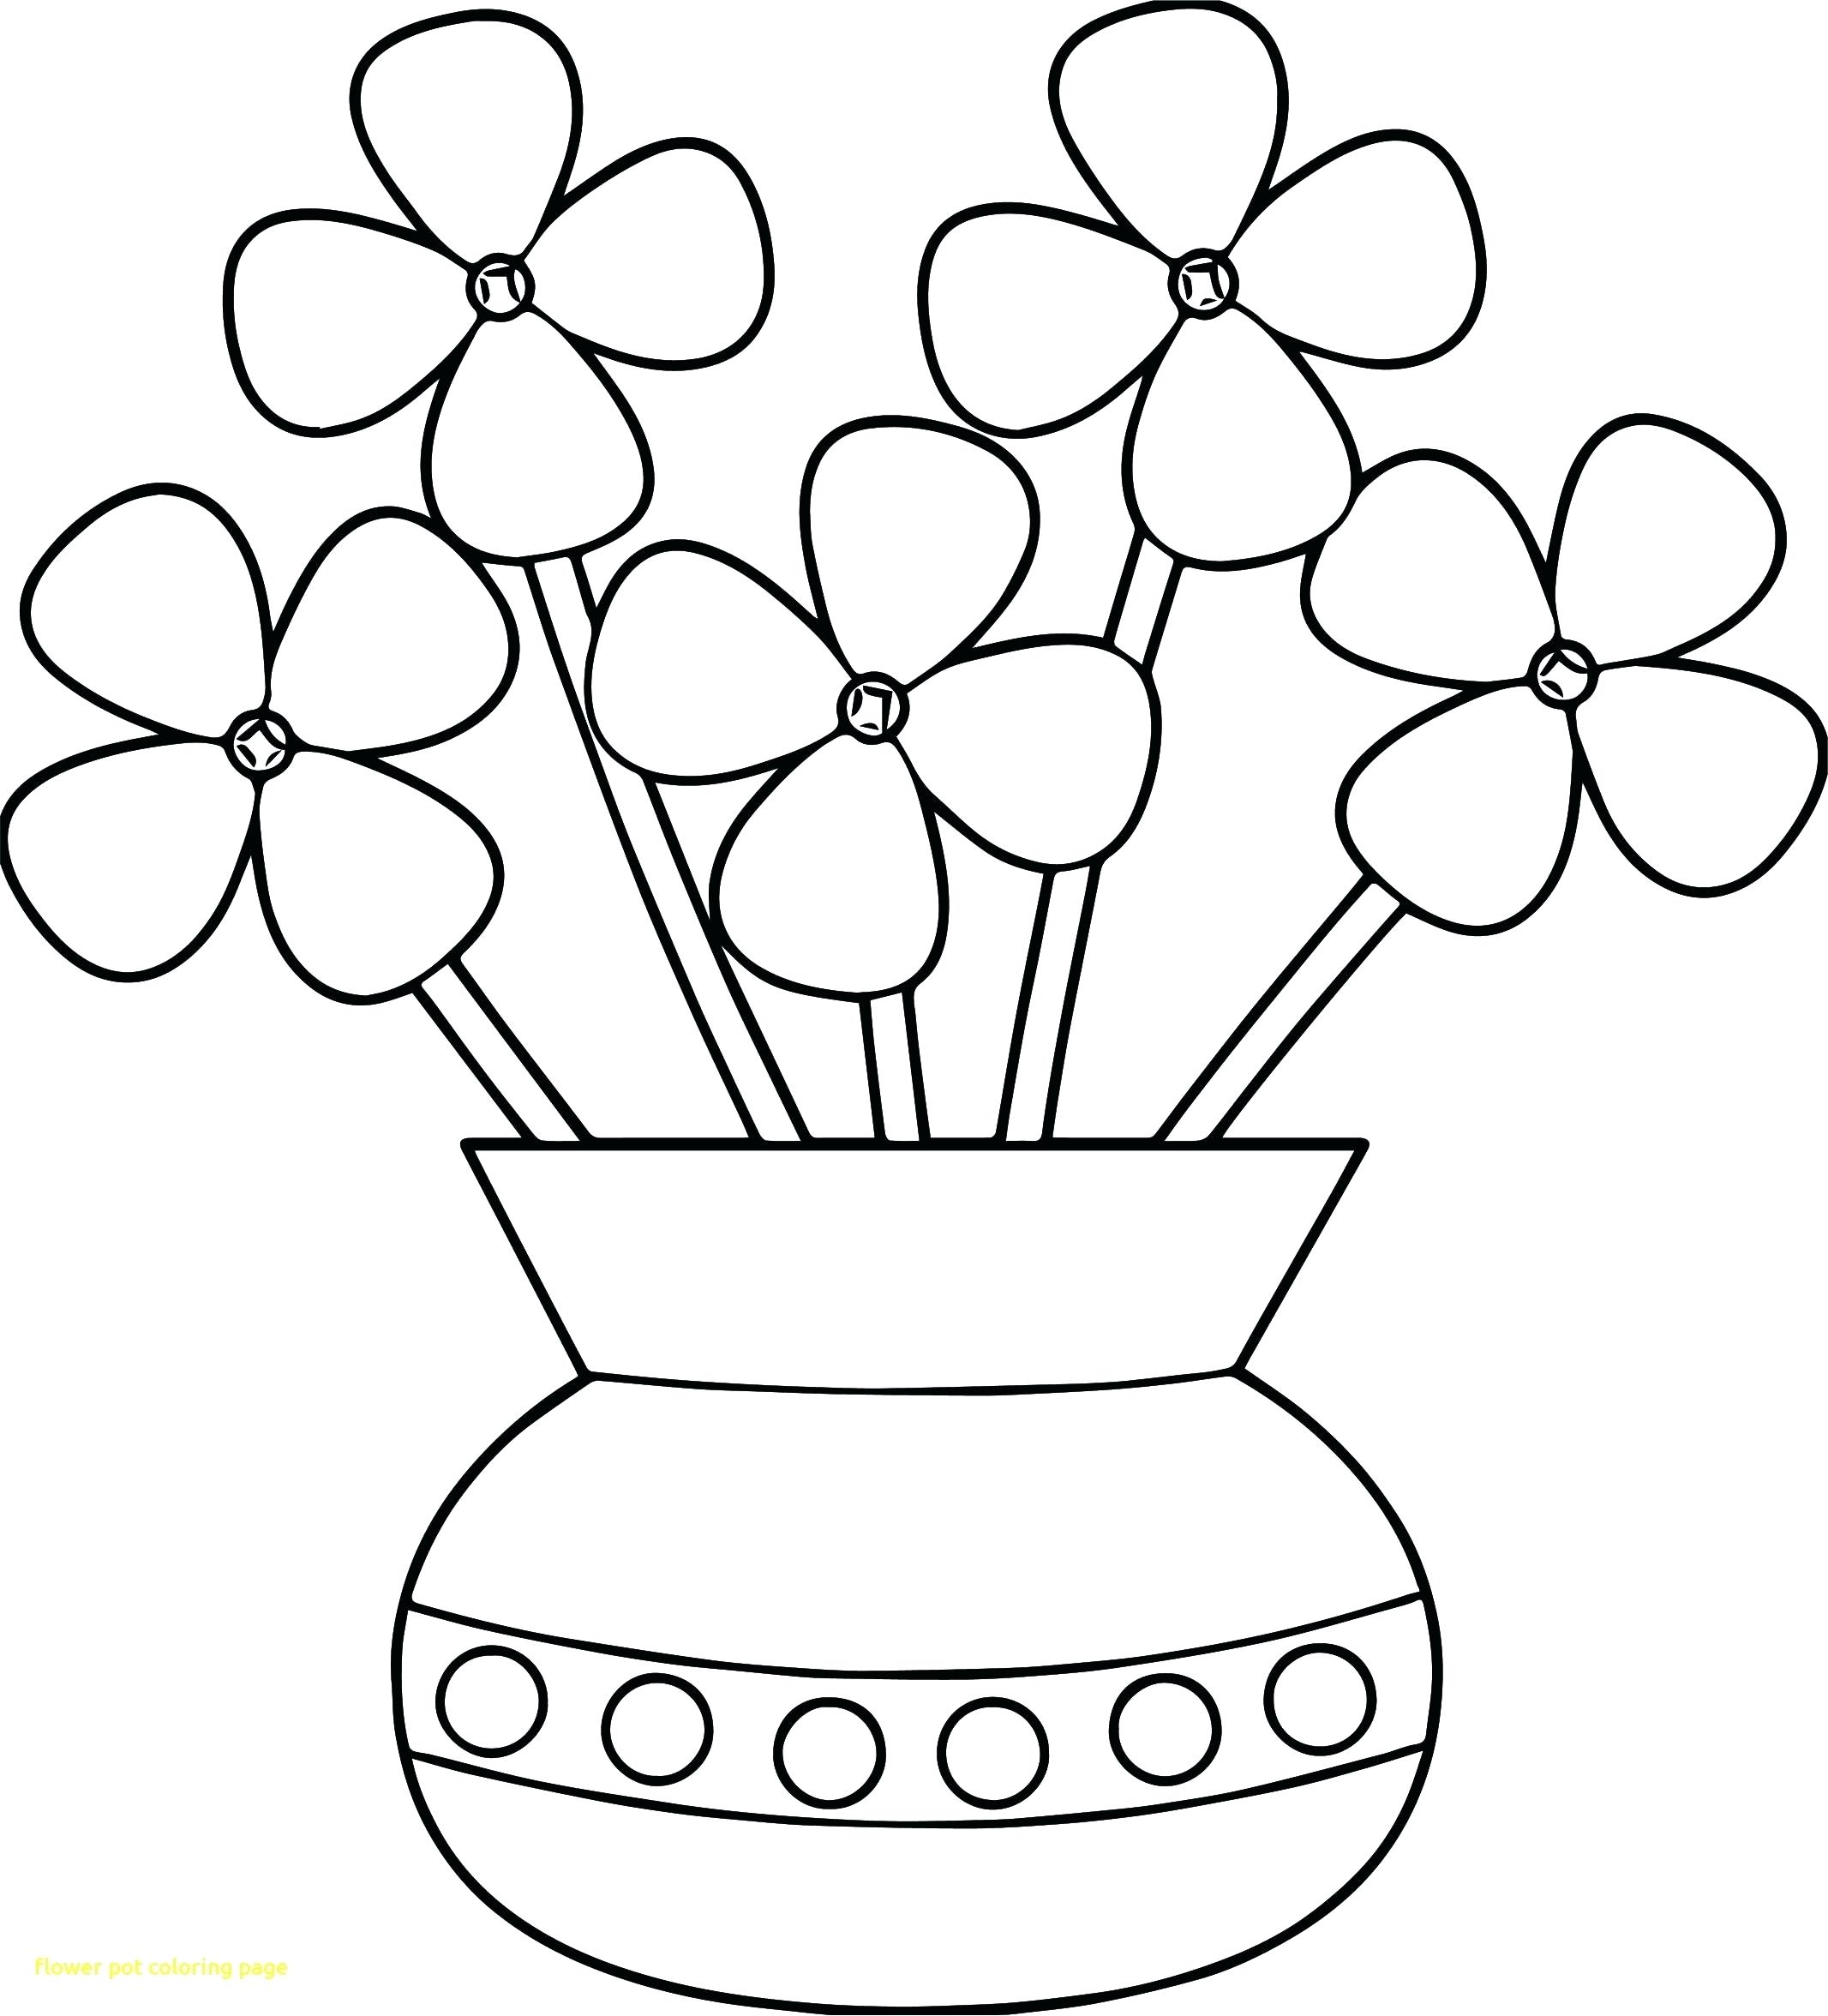 Coloring Book : Free Printable Flowers Coloringts Pages Full ...